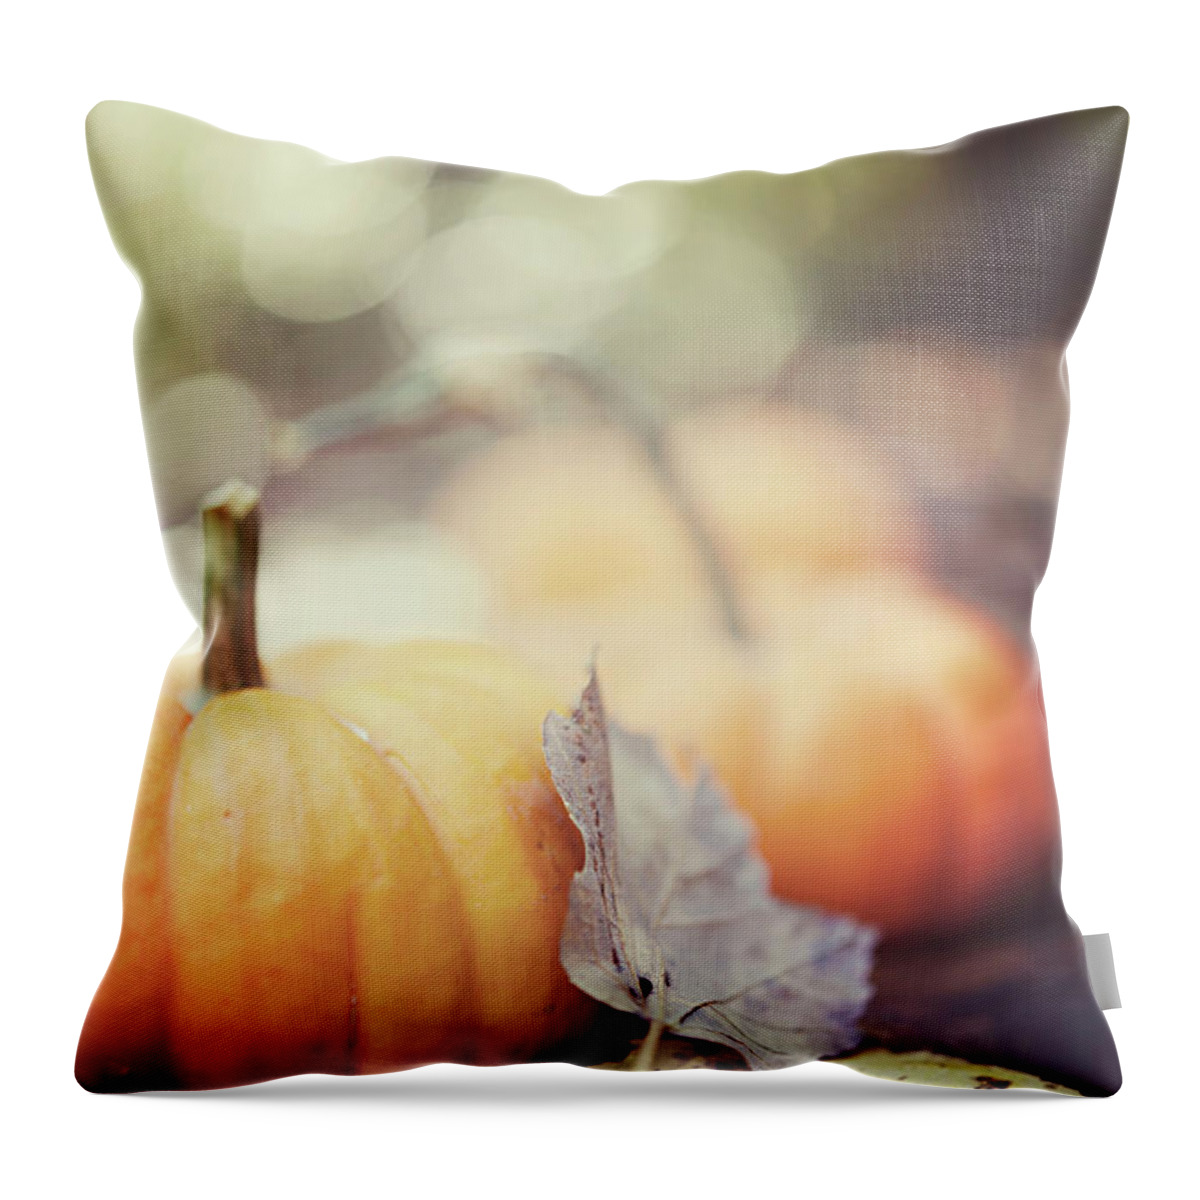 Woodbridge Throw Pillow featuring the photograph Mini Pumpkins With Leaves by Samantha Wesselhoft Photography